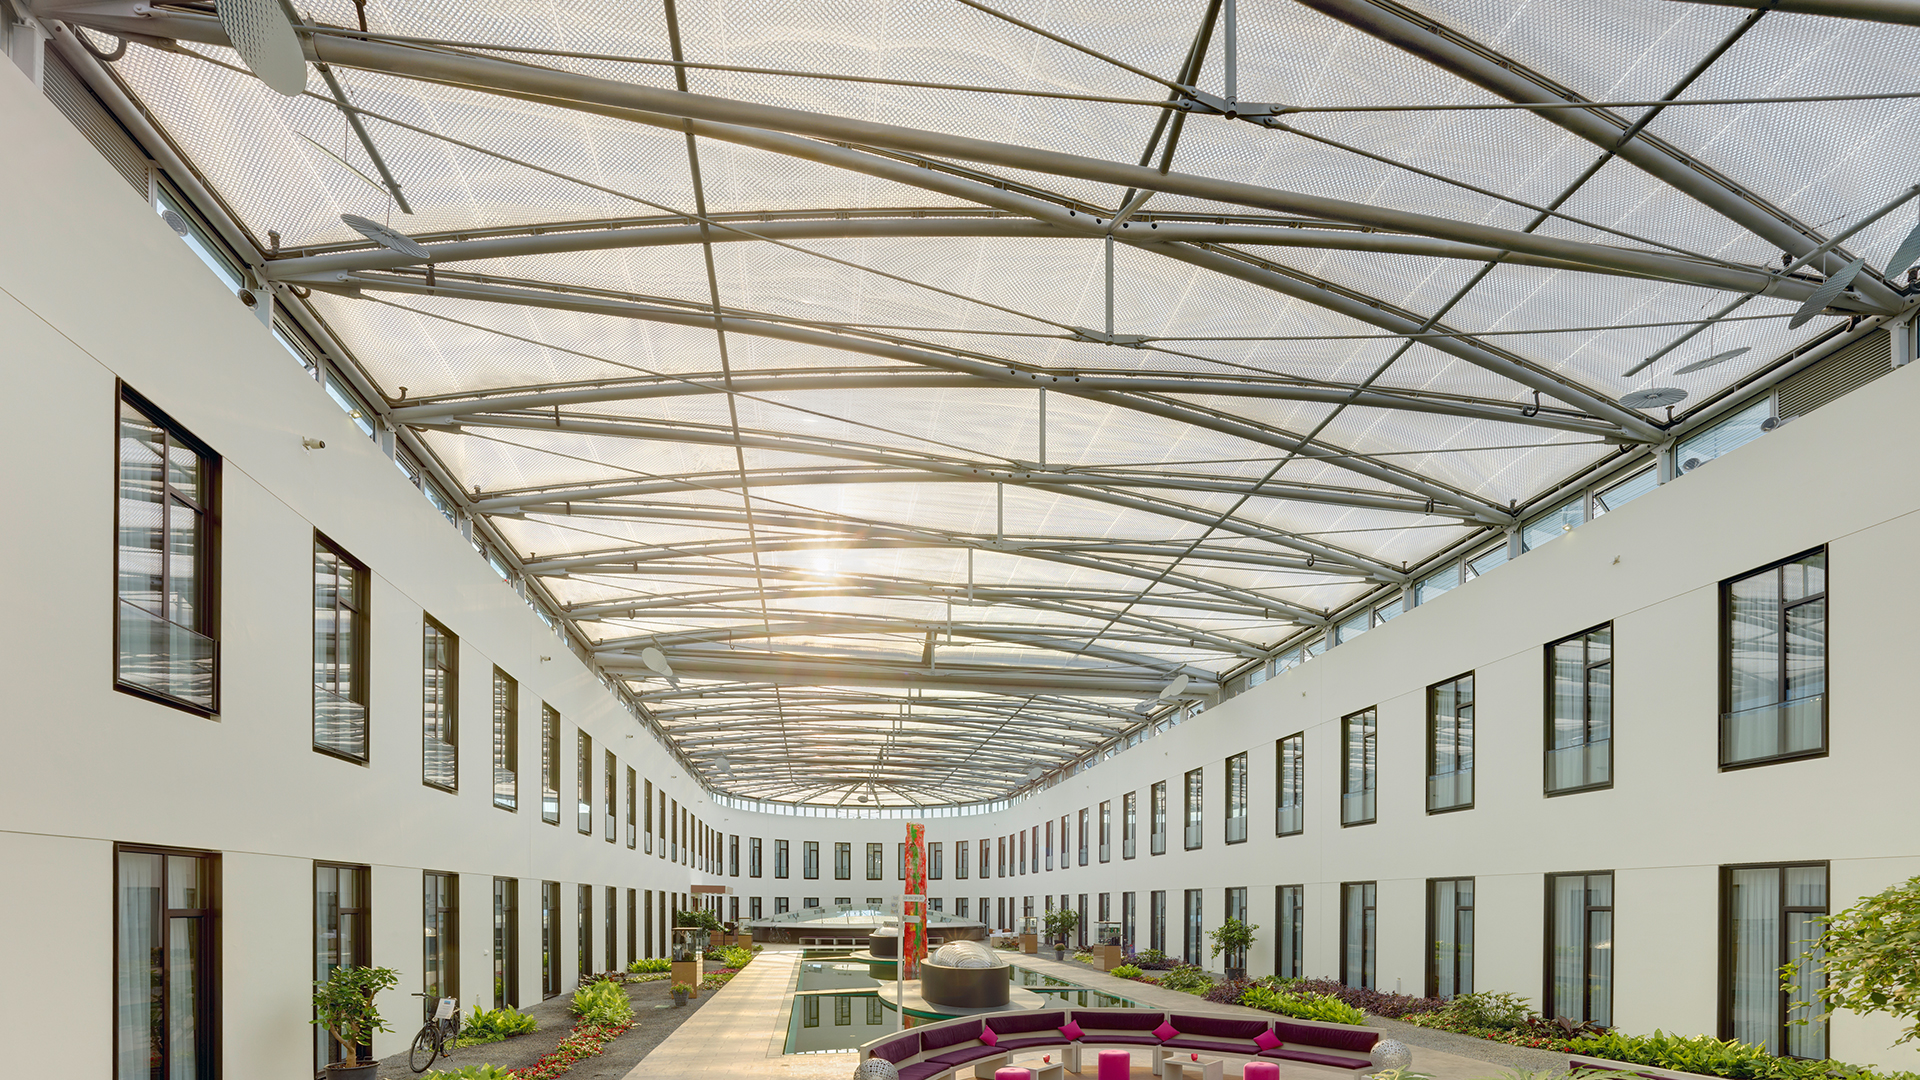 Moa Bogen in Berlin: large Texlon® ETFE foil cushions span the inner courtyard and provide a view of the sky at the Hotel and Shopping Center